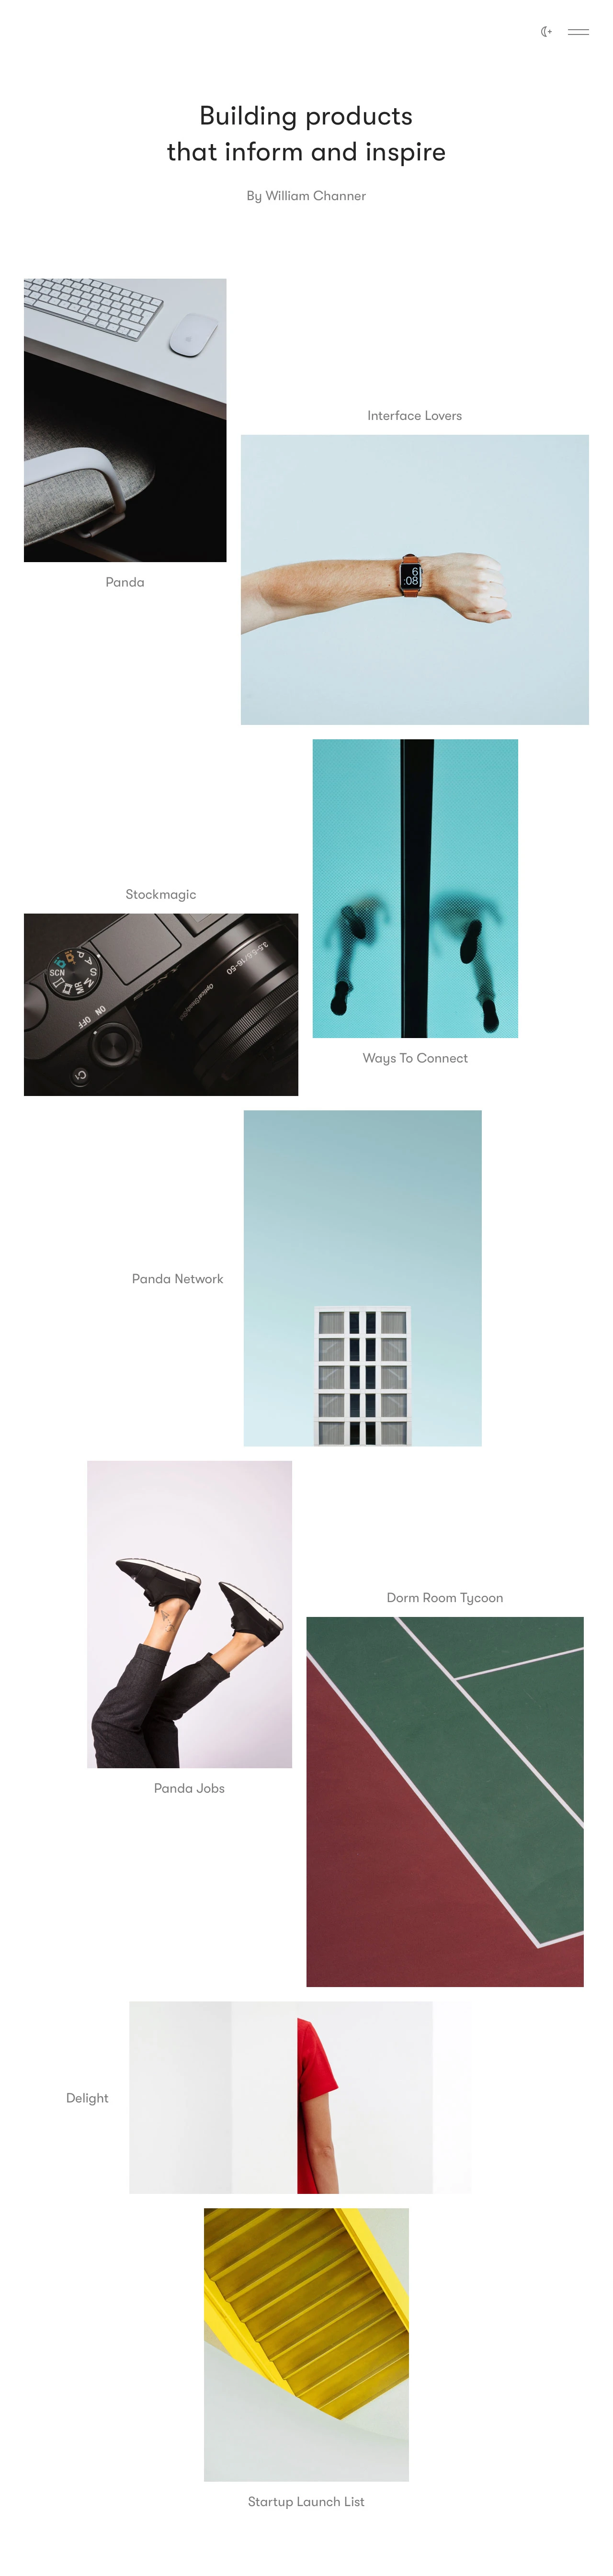 William Channer Landing Page Example: Building products that inform and inspire